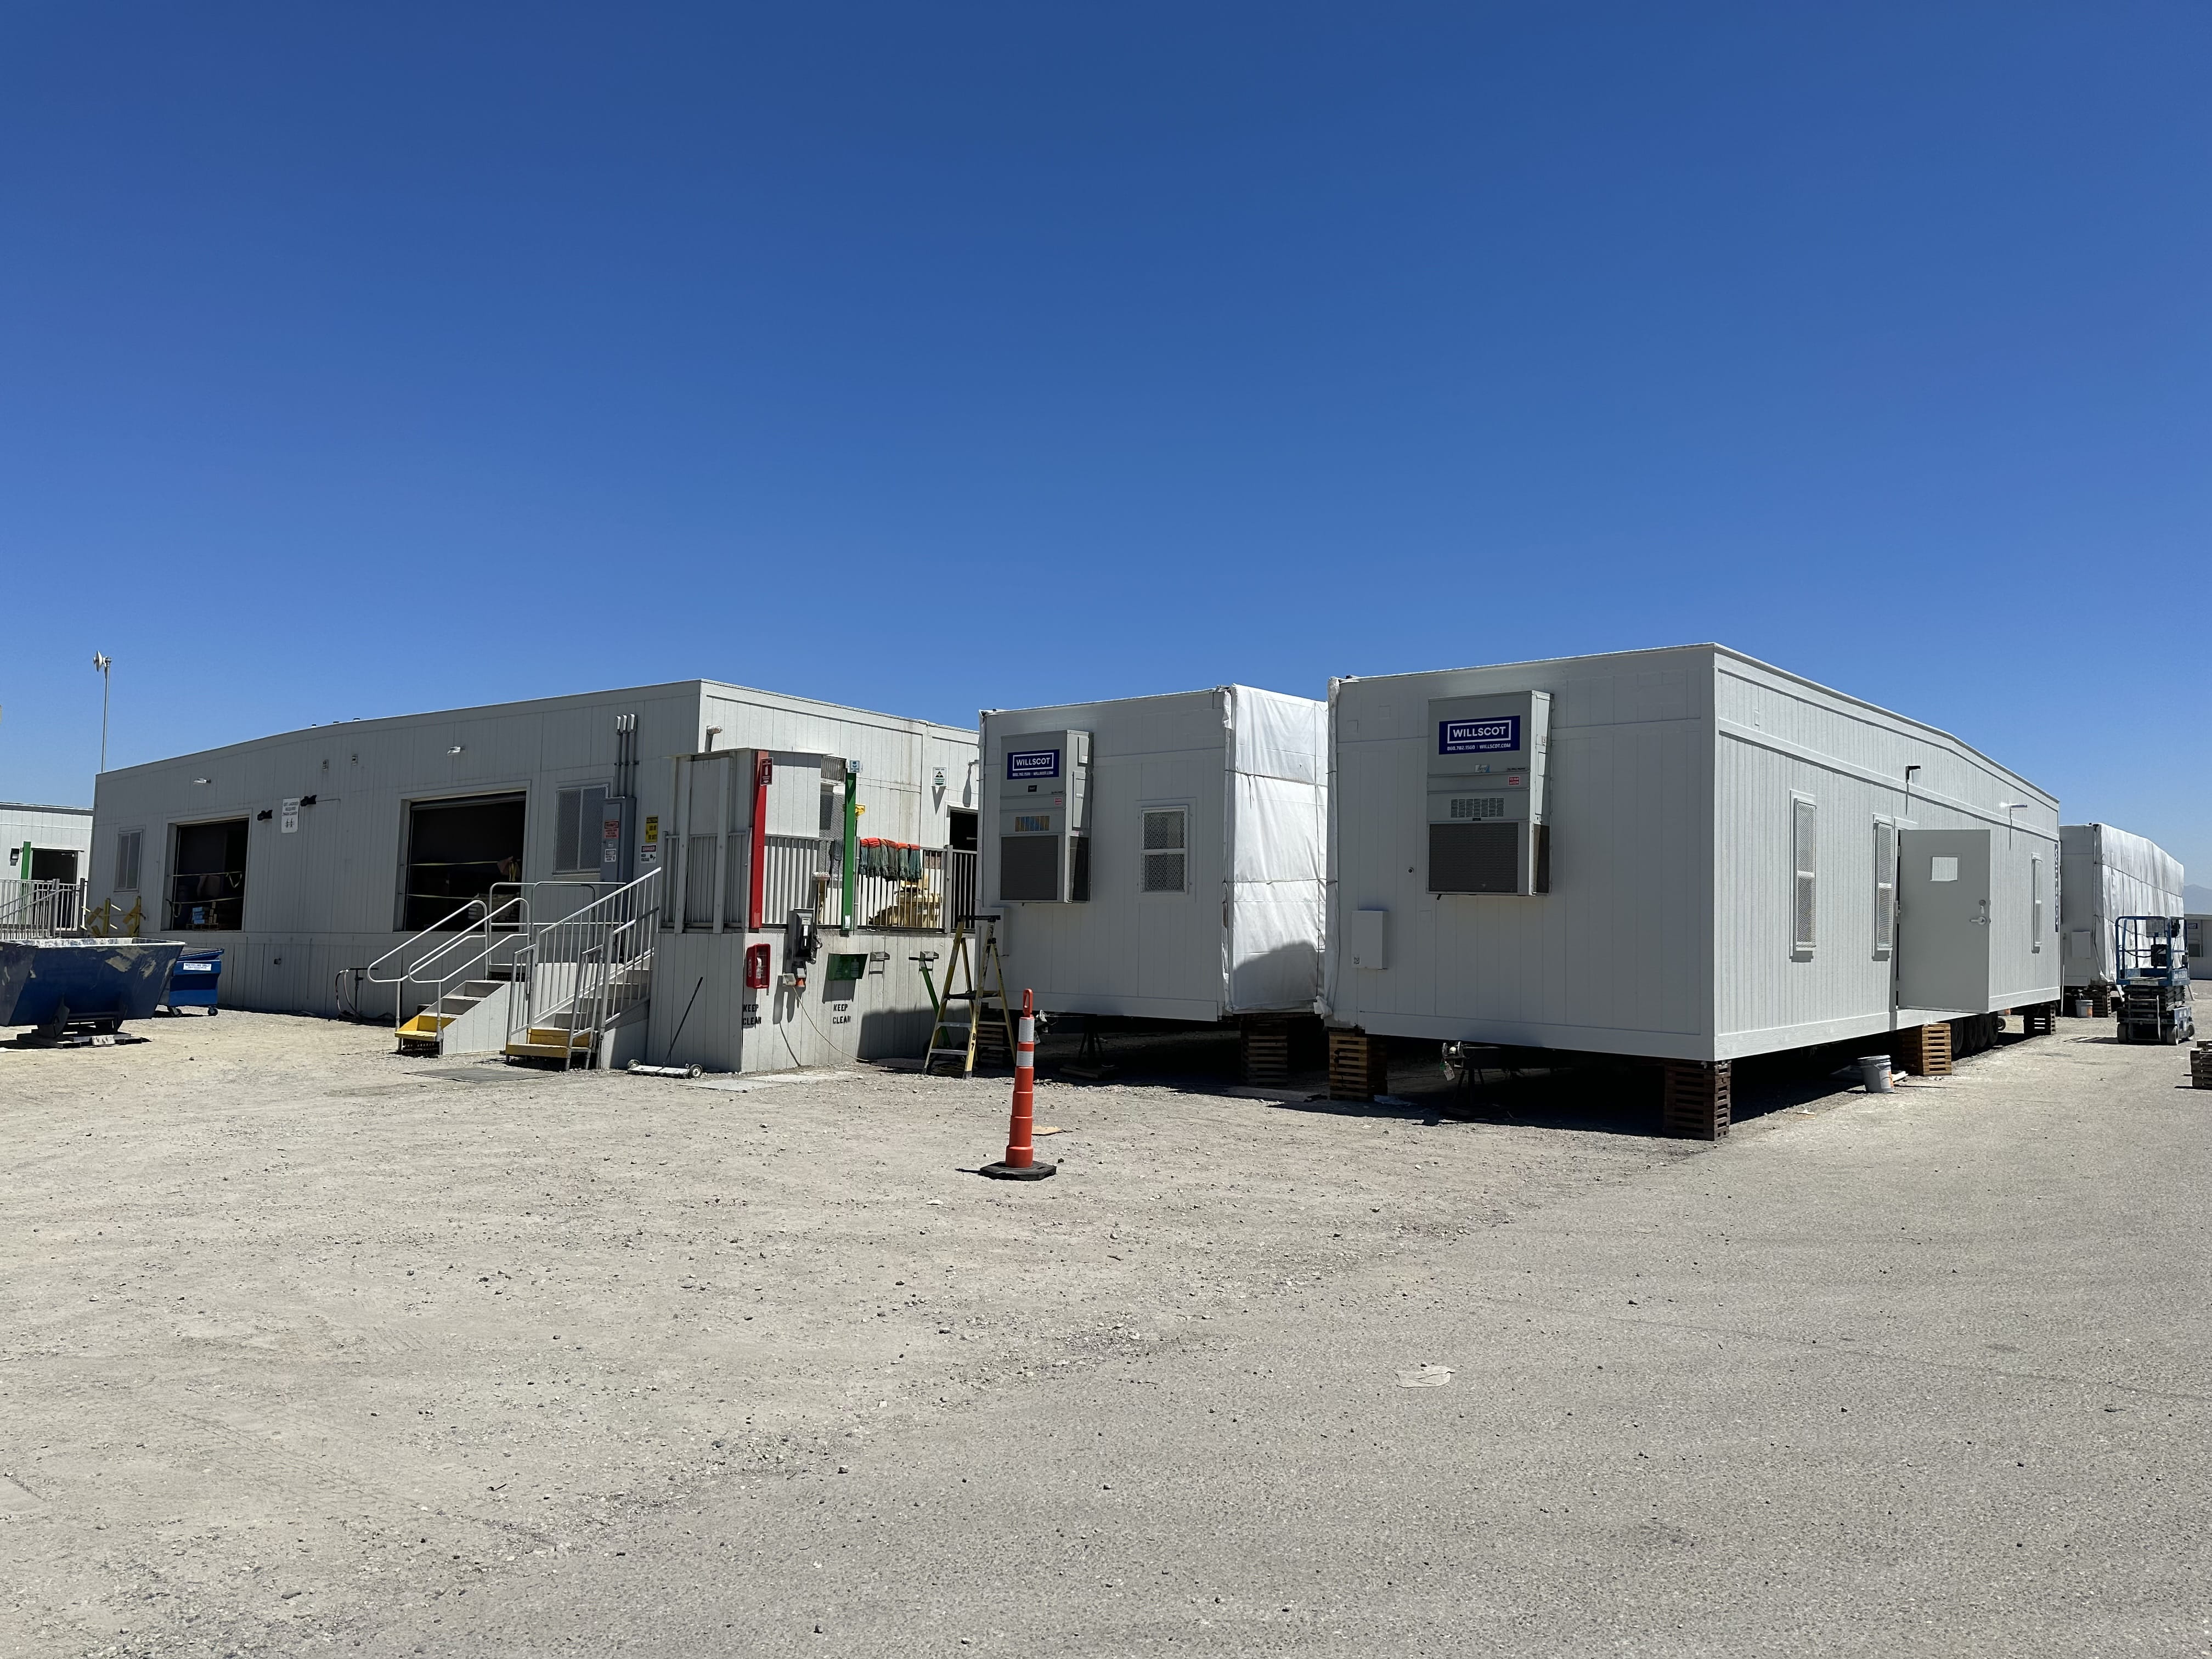 the exterior of trailers at the WillScot Fontana, CA office